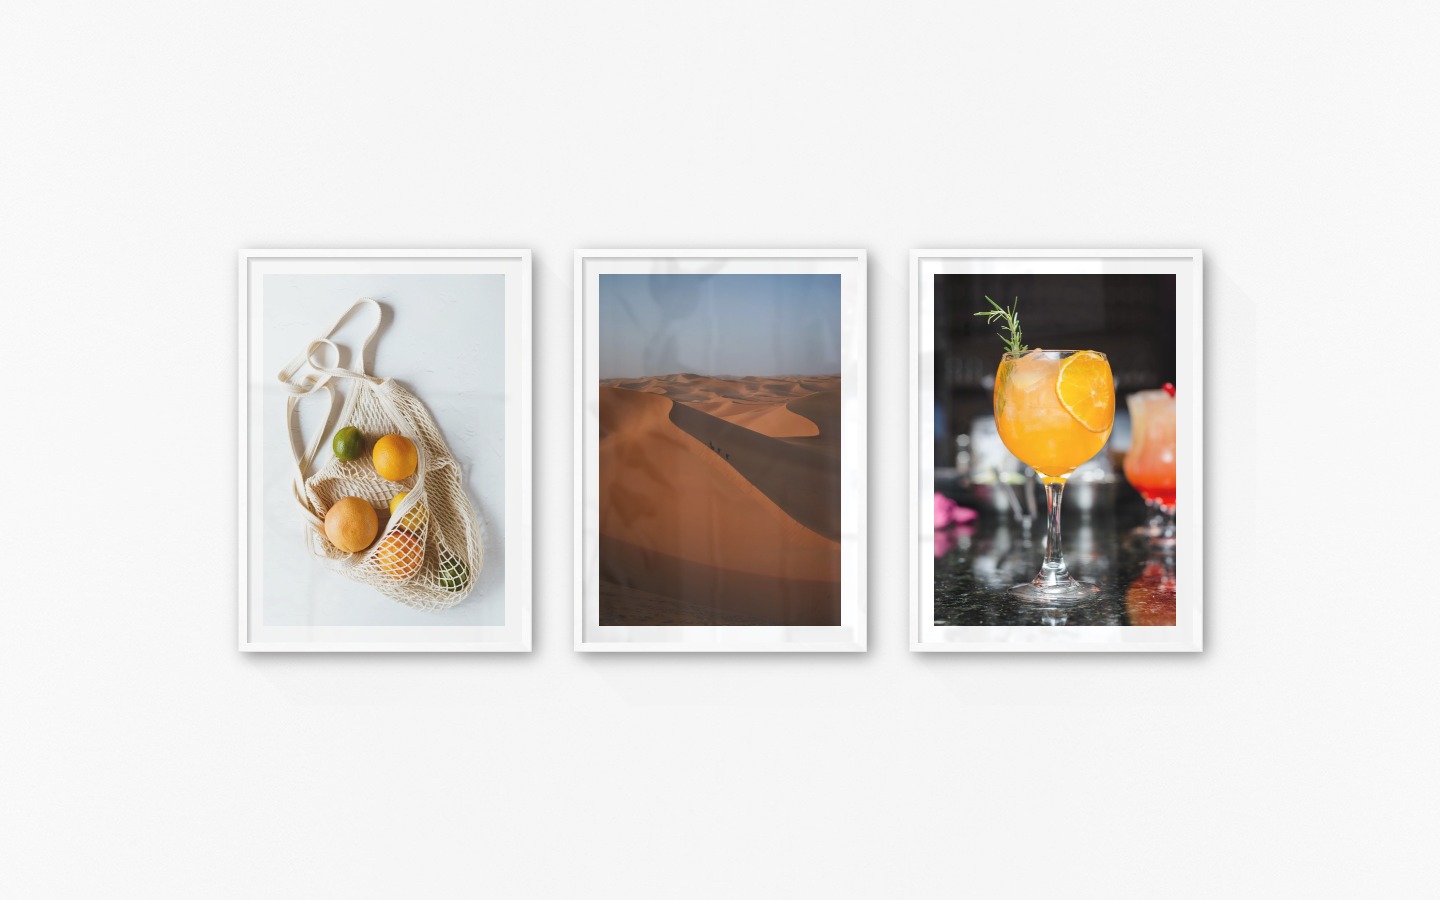 Gallery wall with picture frames in white in sizes 50x70 with prints "Fruit in a bag", "Desert" and "High orange drink"